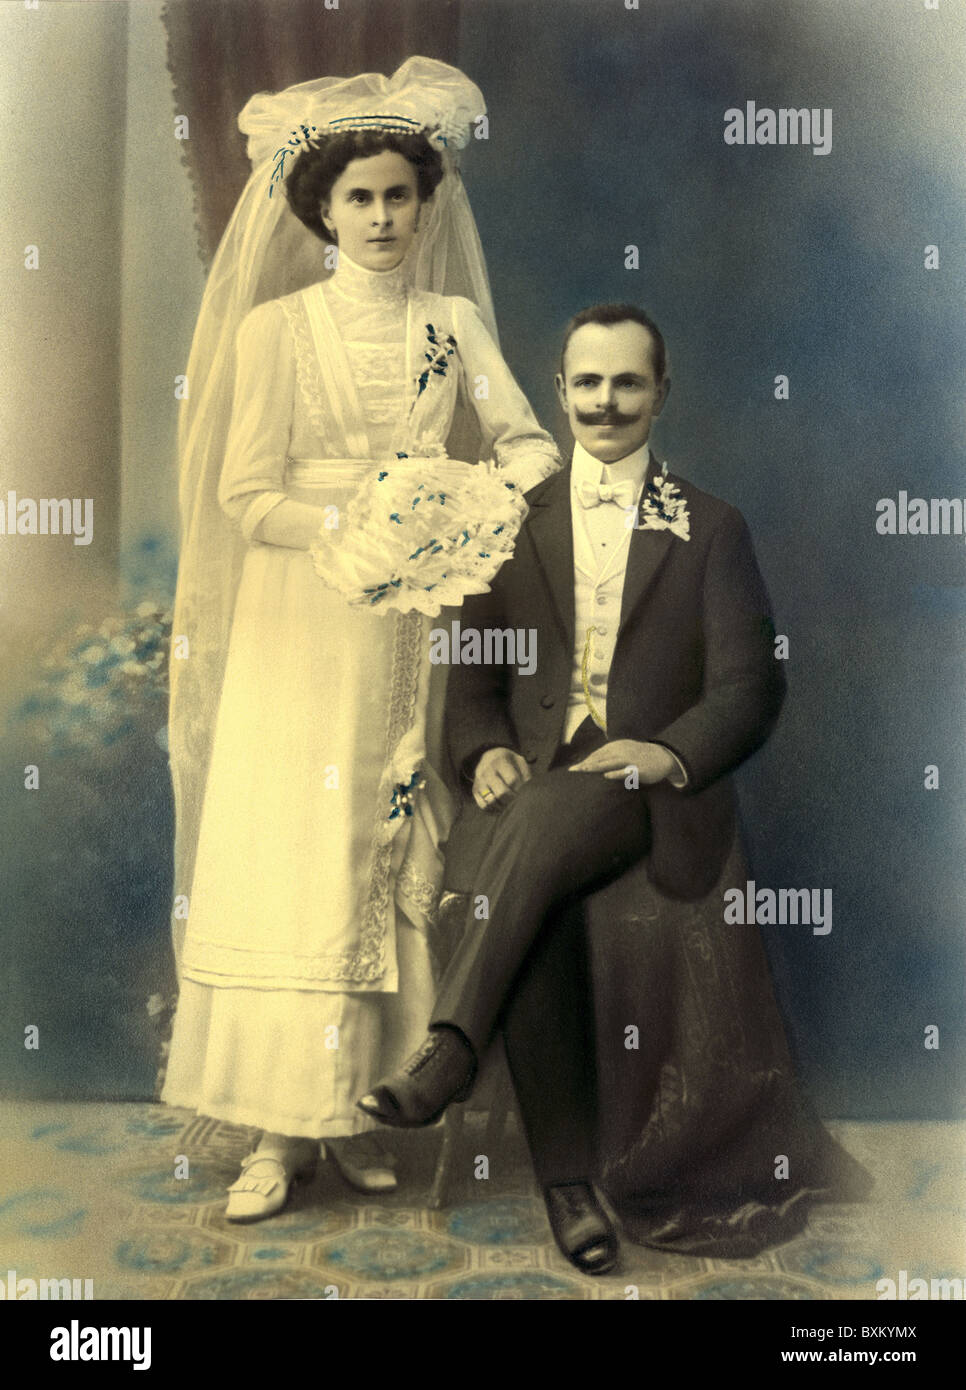 people, couples, bridal couple, bride and groom, Austria, circa 1920, Additional-Rights-Clearences-Not Available Stock Photo